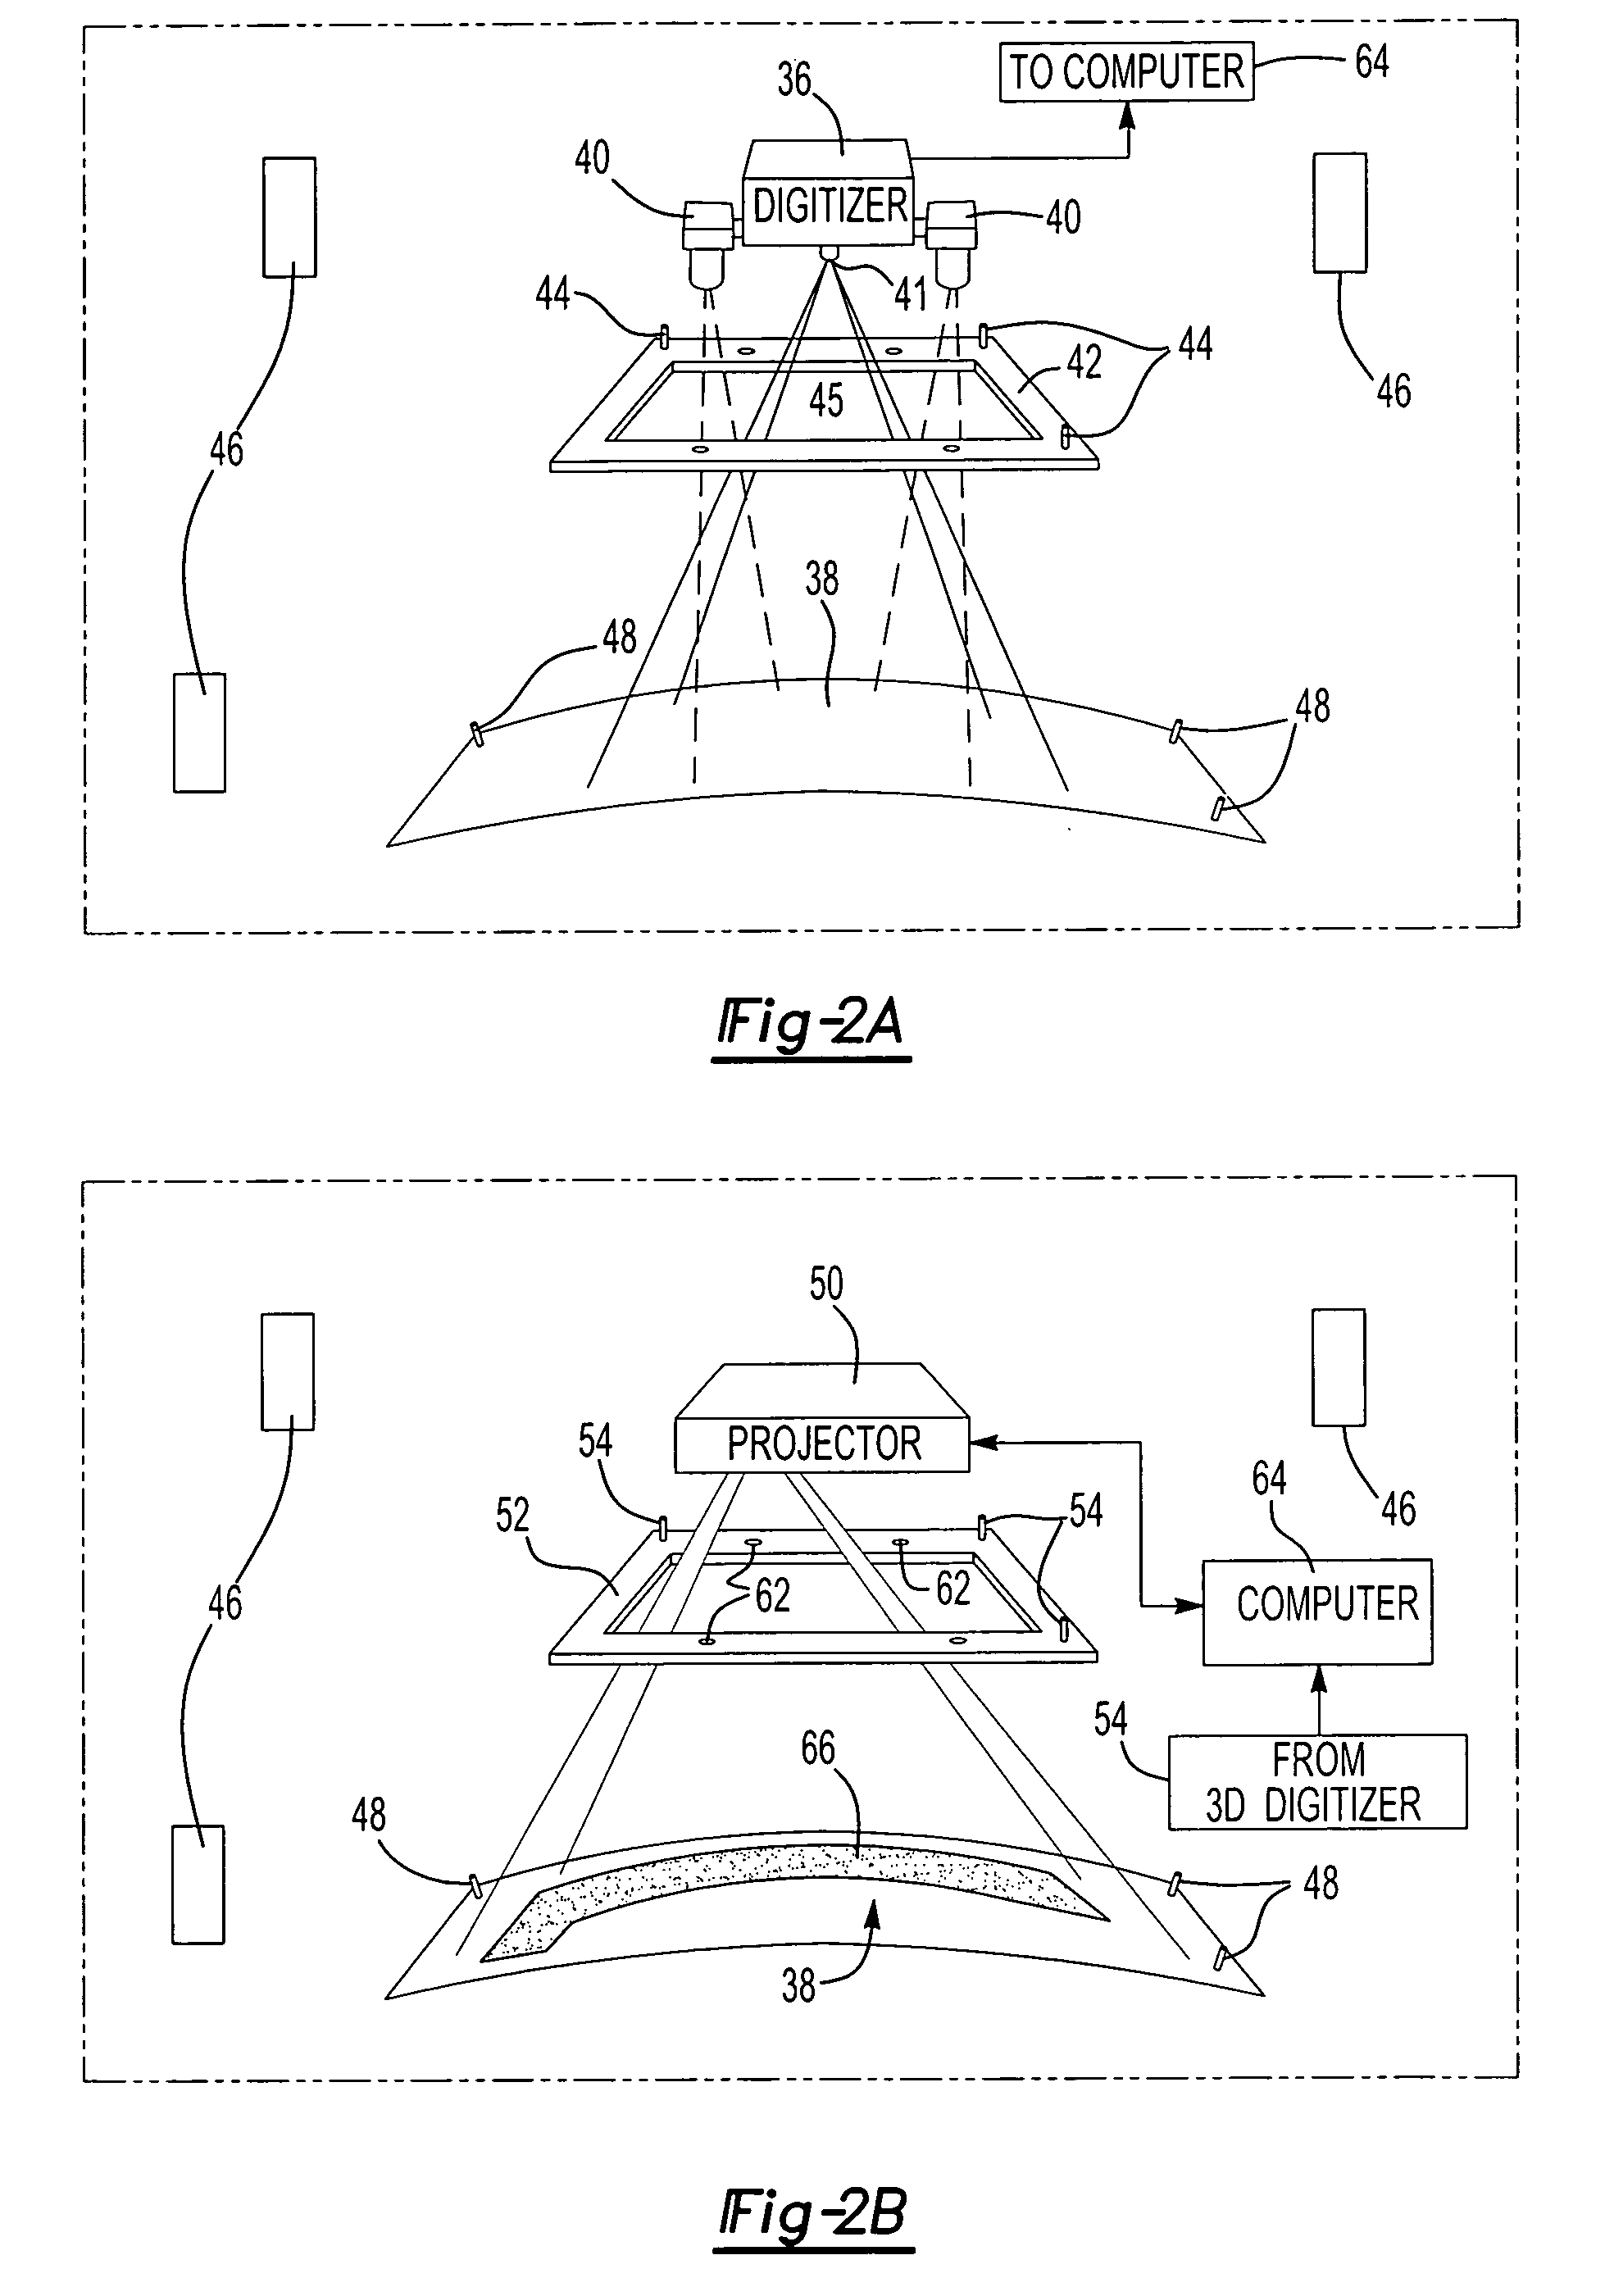 Laser projection system, intelligent data correction system and method